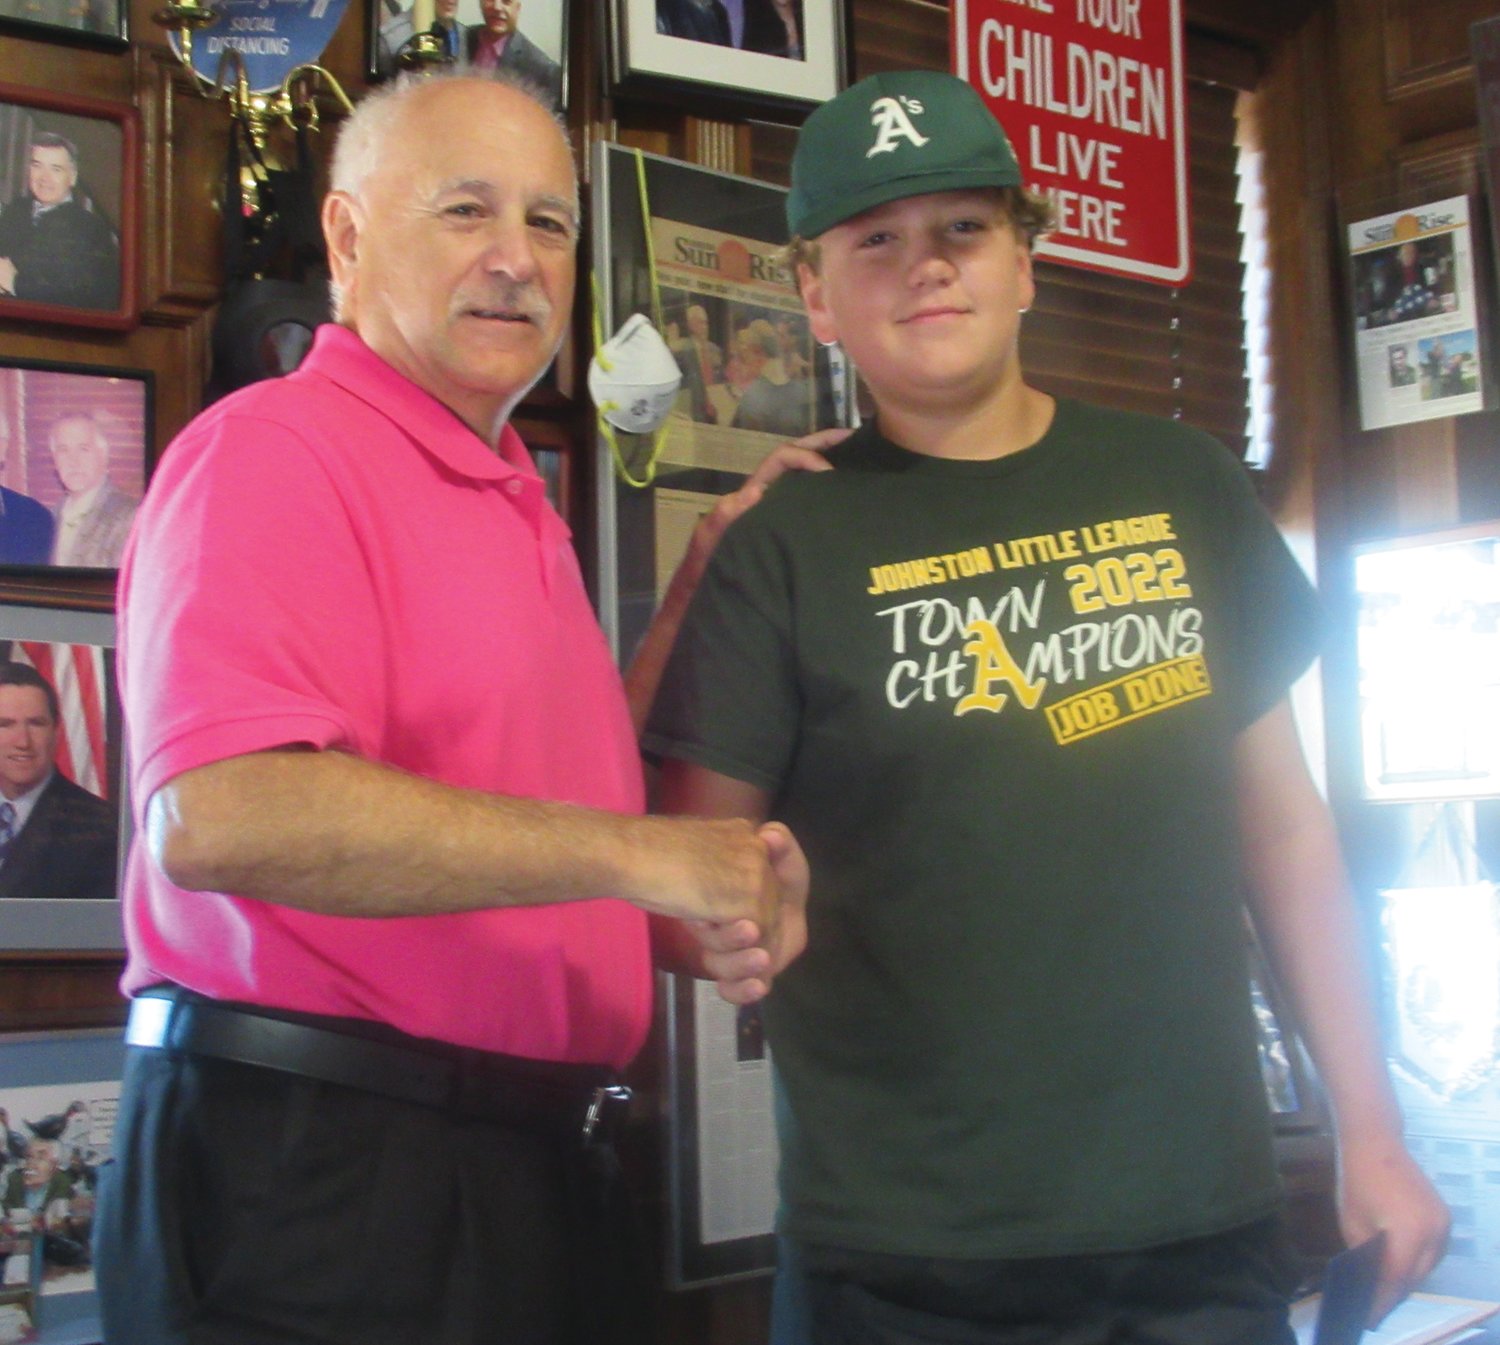 LINKED LEADERS: Mayor Joseph Polisena congratulates Athletics Aiden Neil Captain for winning the 2022 Town Championship during last Thursday’s ceremony inside Town Hall.